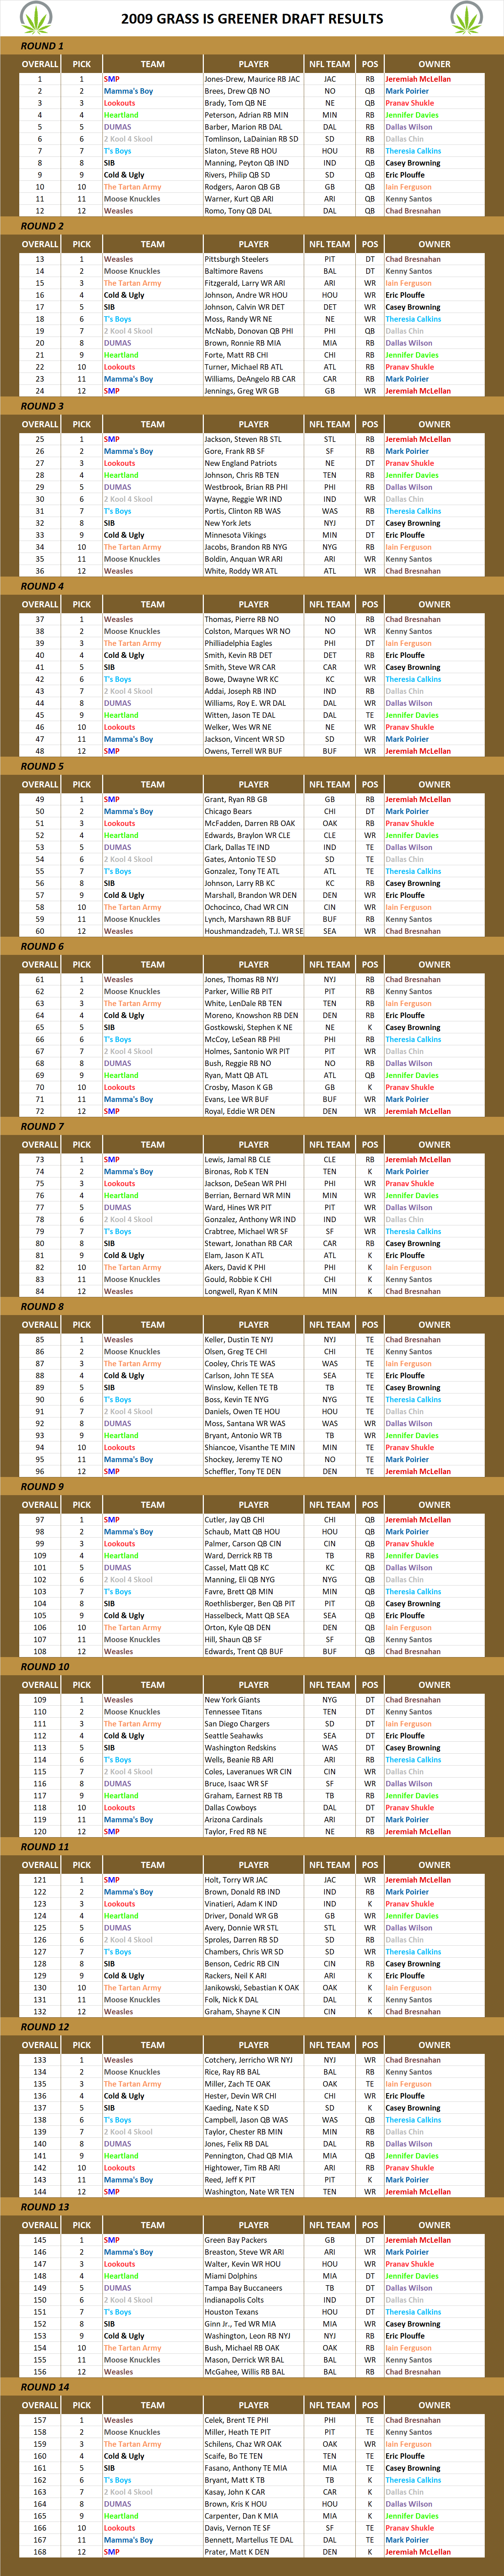 2009 National Football League Pool Draft Results